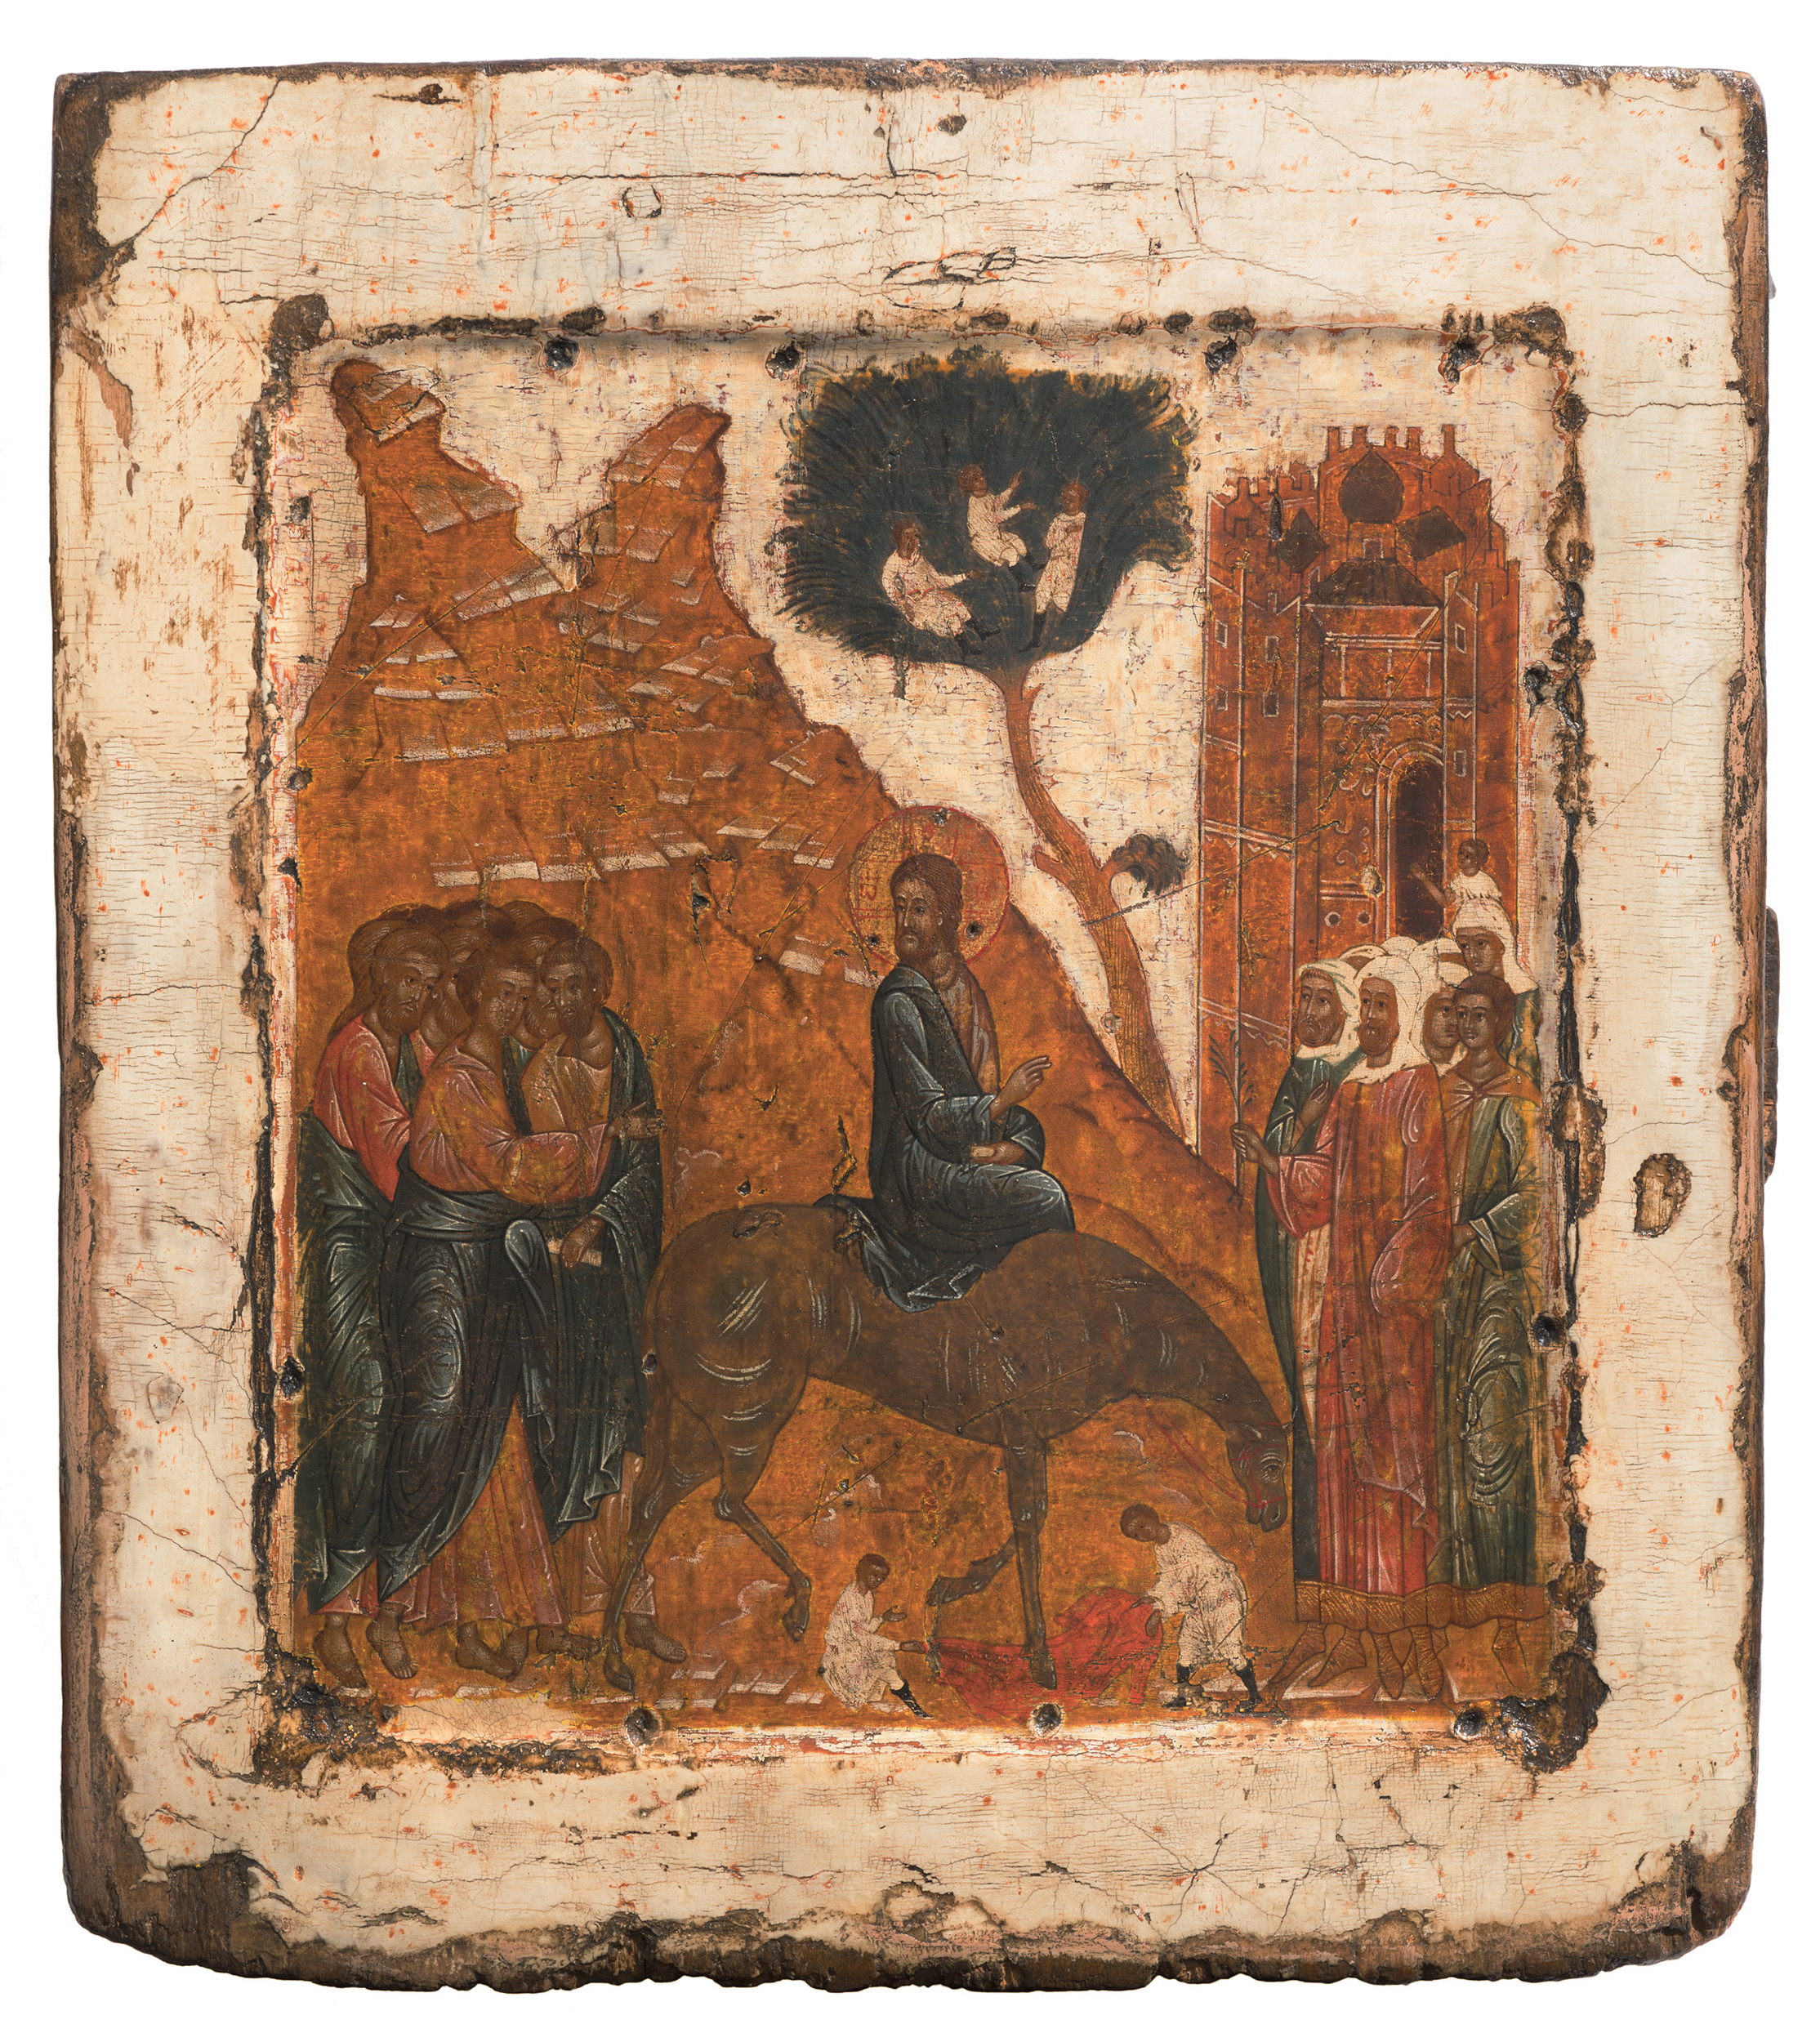 <p><em>Christ&#39;s Entry into Jerusalem</em>, Russia, late 18th cebtury, egg tempera and gesso on linen over wood, private collection, Canberra</p>
